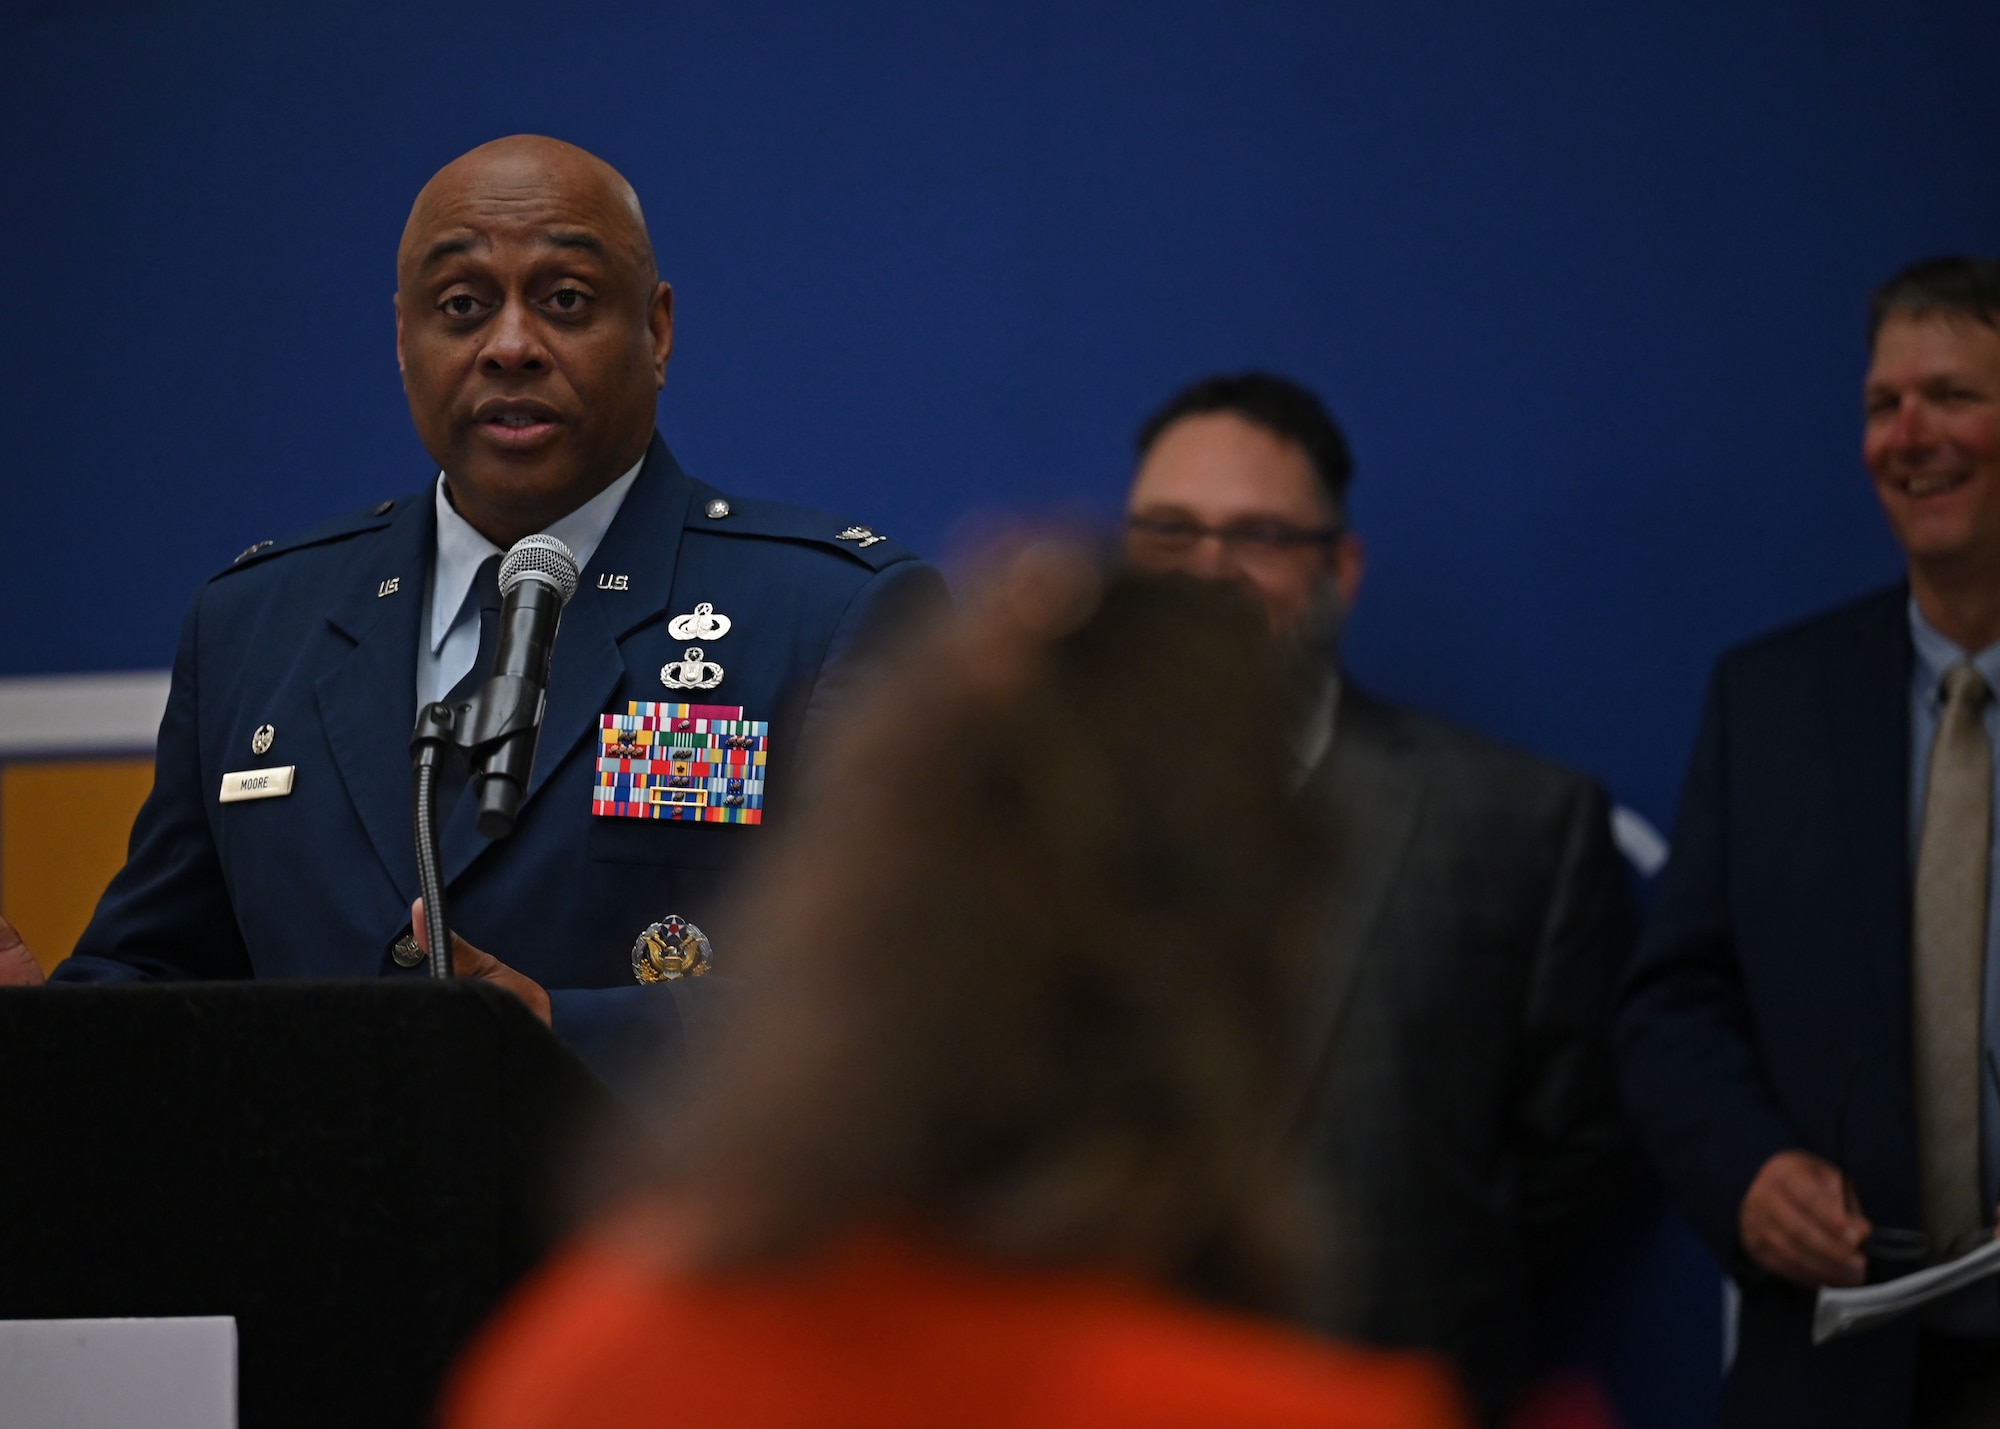 U.S. Air Force Col. Eugene Moore, 17th Mission Support Group commander, talks during the Texas Conference for Employers, Midland, Texas, May 5, 2023. Goodfellow Air Force Base was nominated for its outstanding veteran community partnership. (U.S. Air Force photo by Senior Airman Sarah Williams)